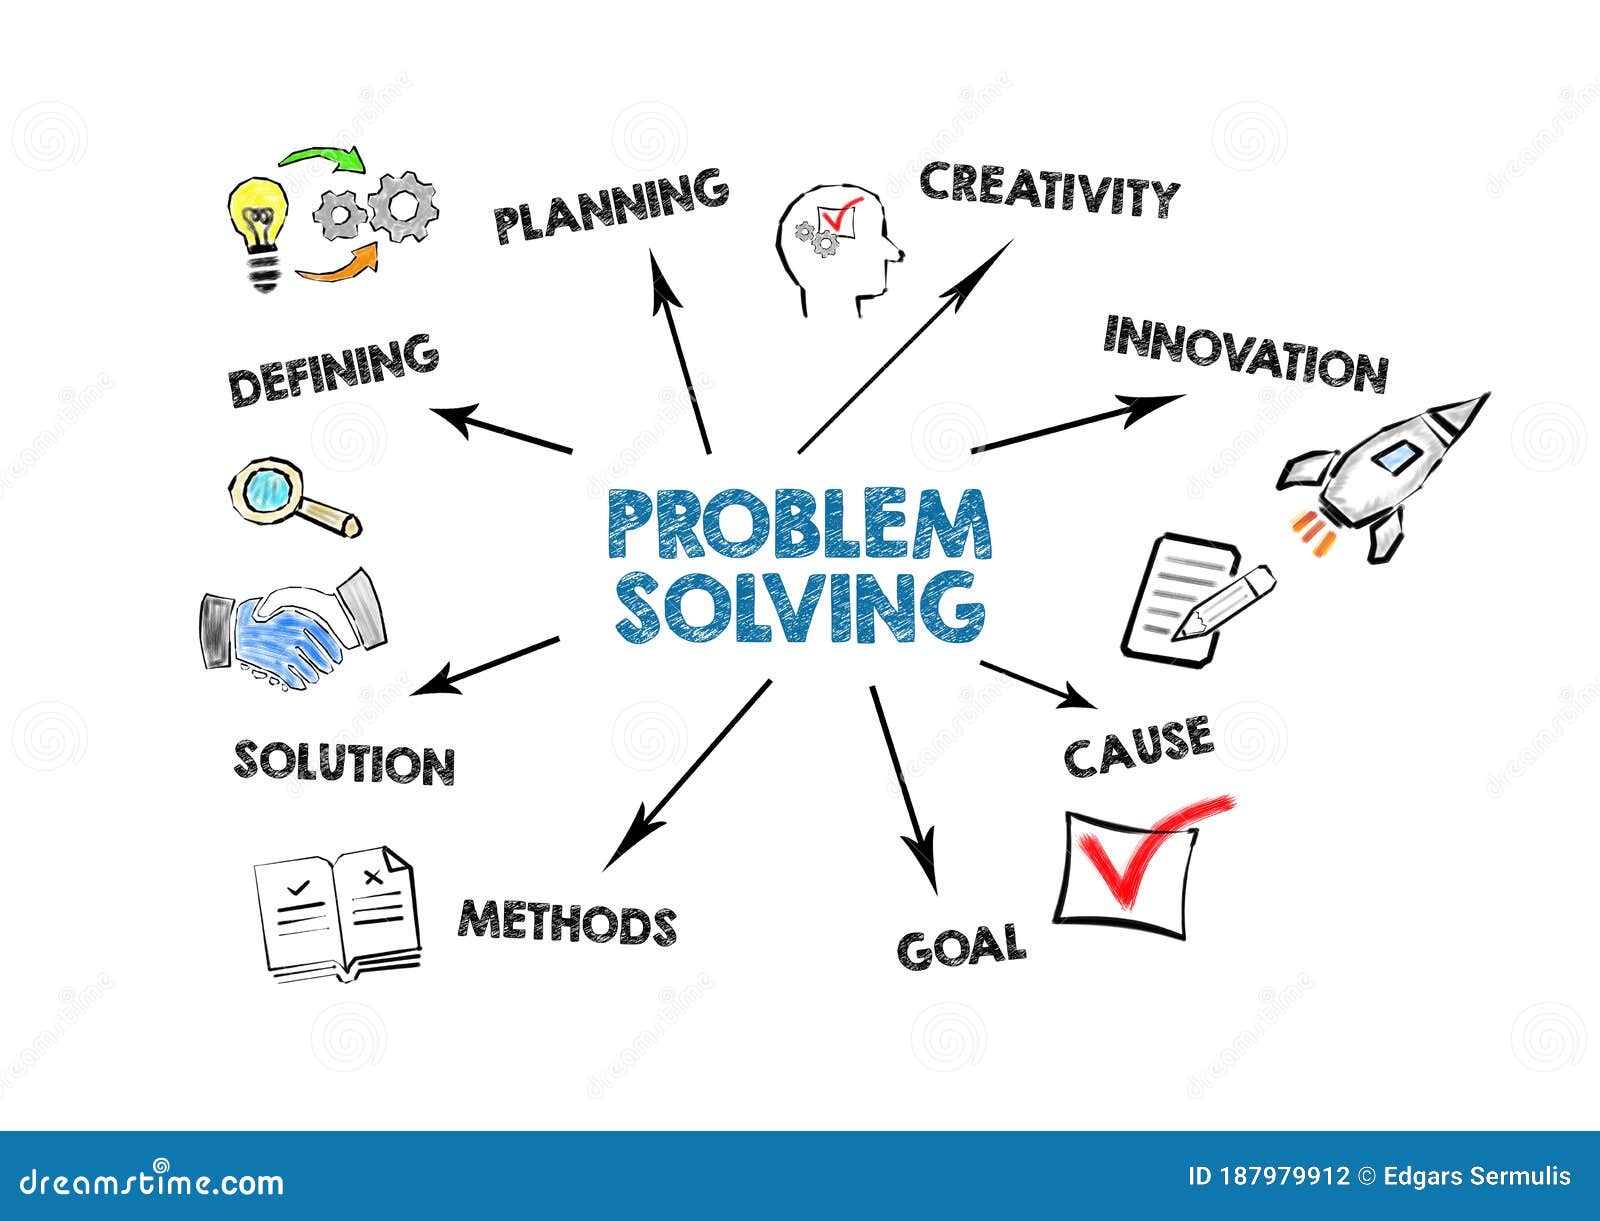 problem solving. defining, creativity, innovation and solution concept. chart with keywords and icons